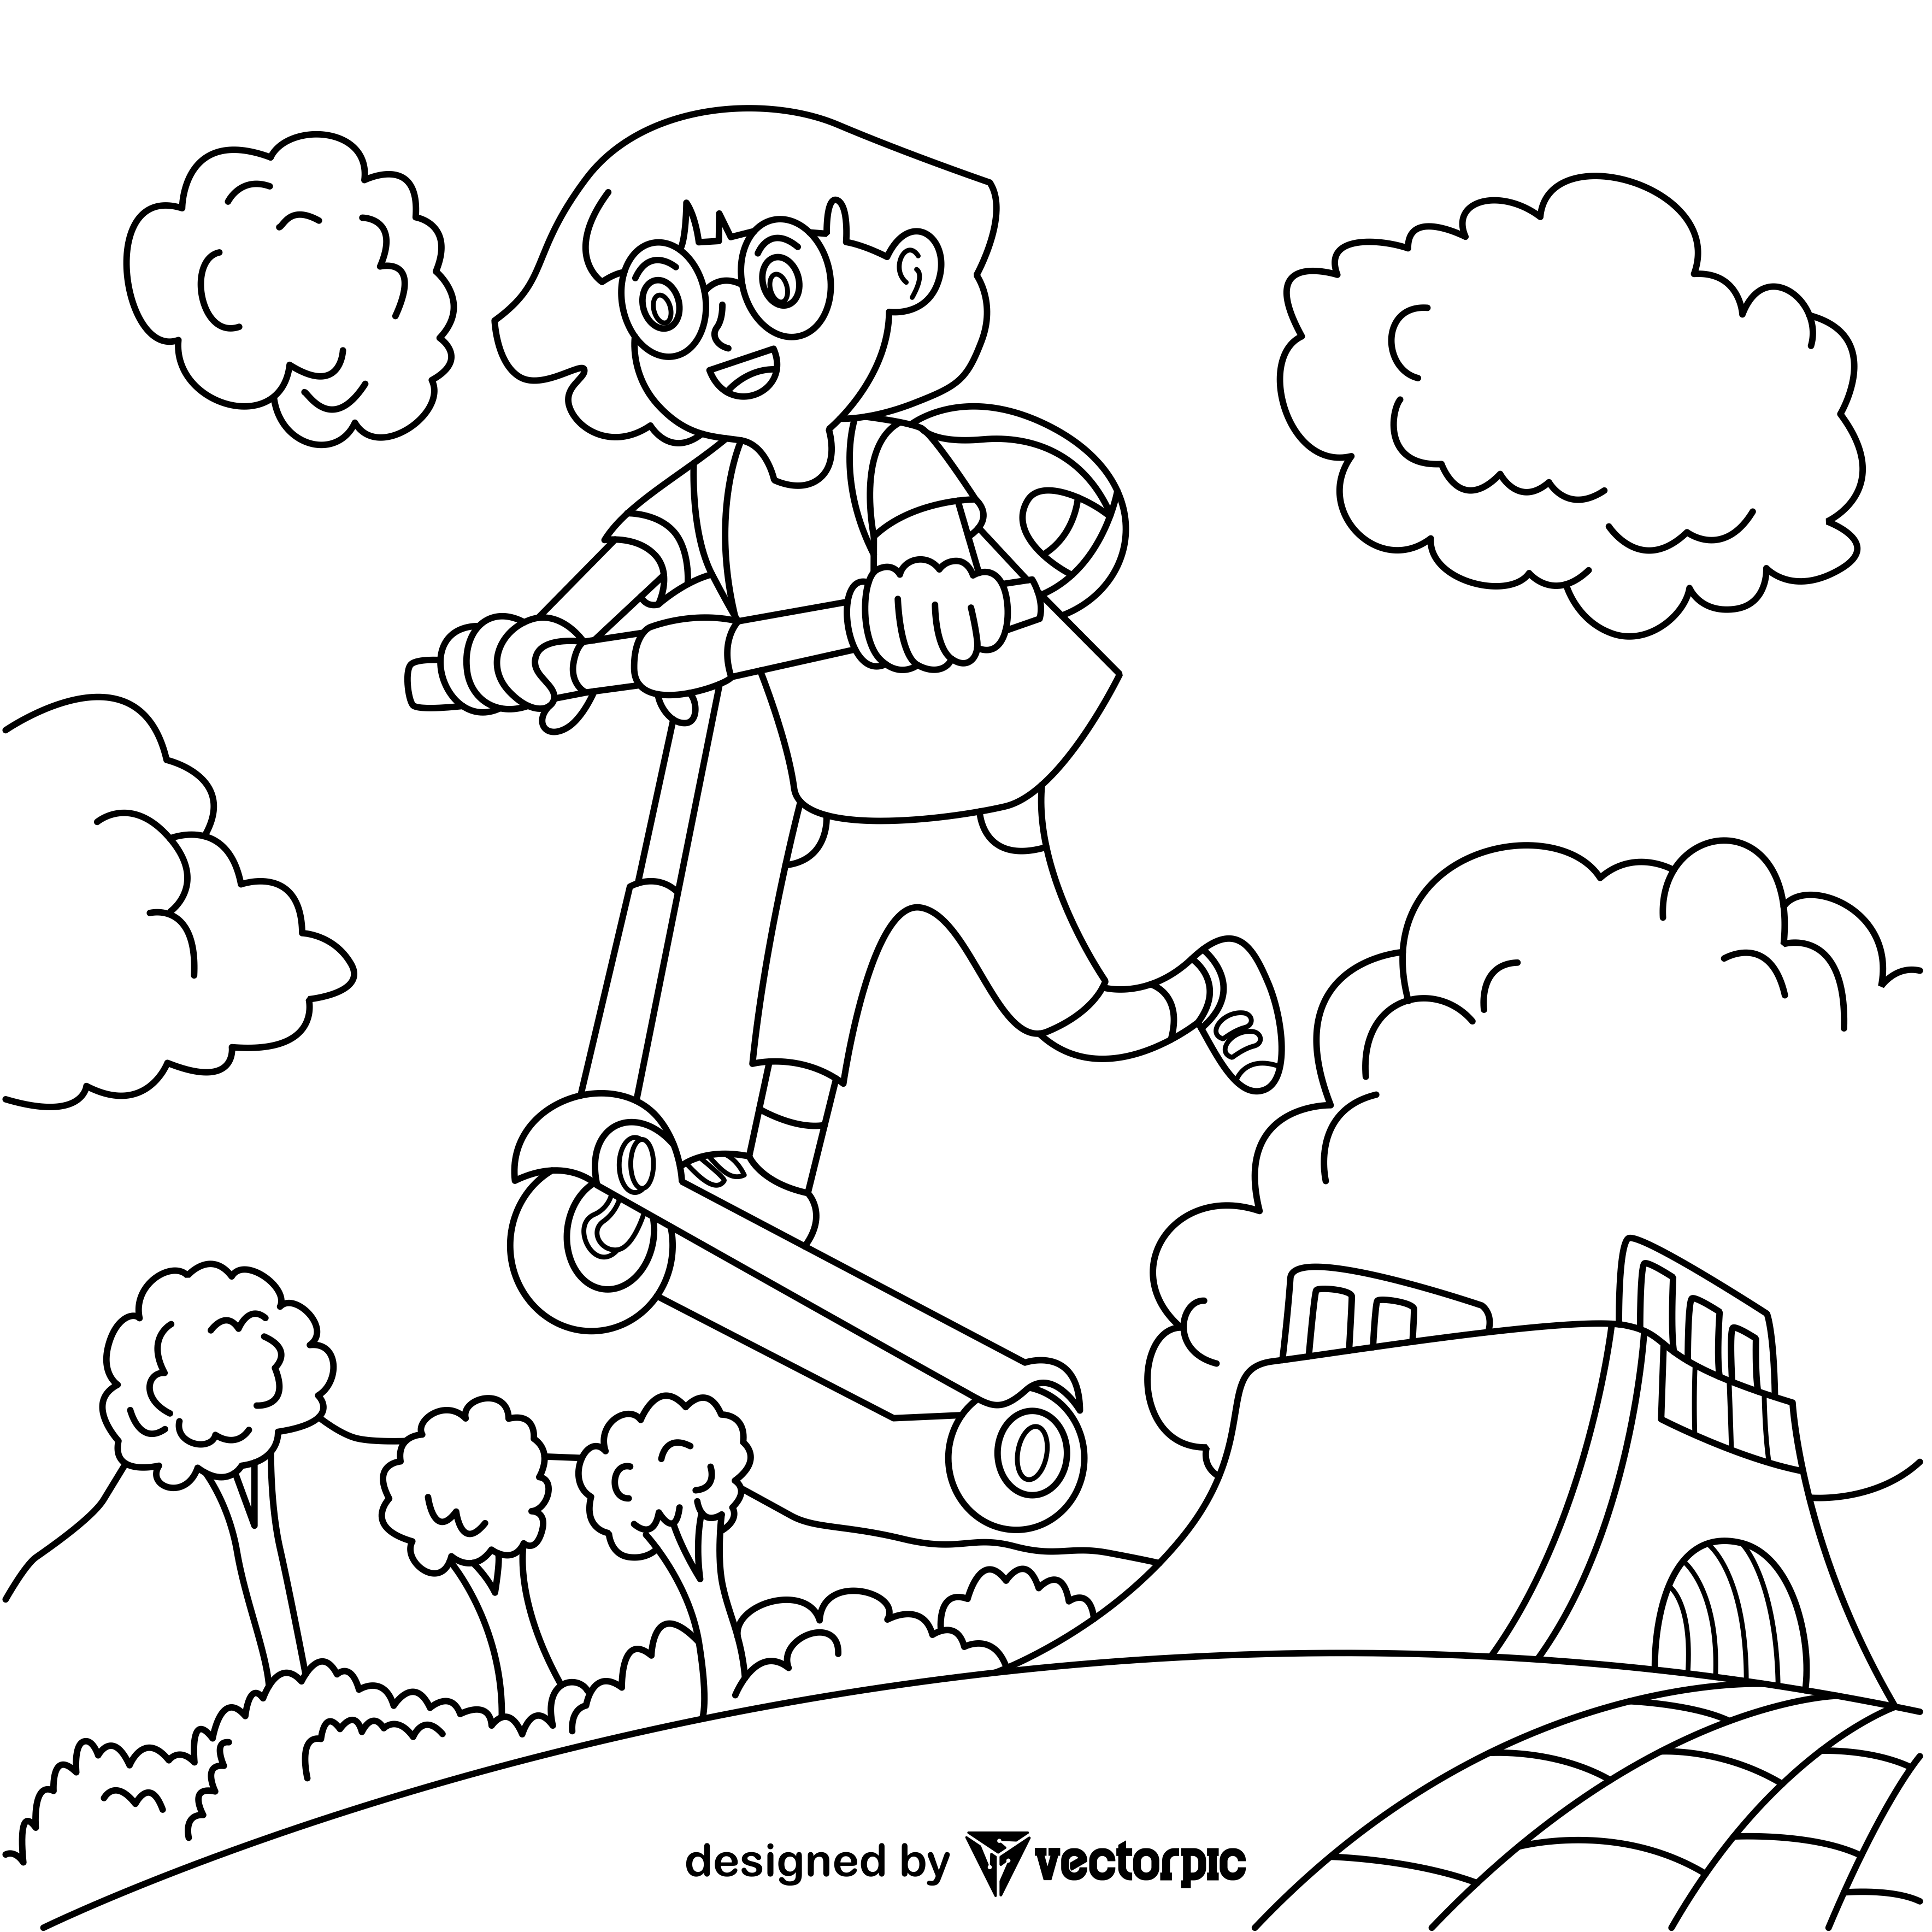 Dora scooter coloring pages for kids adults design free vector